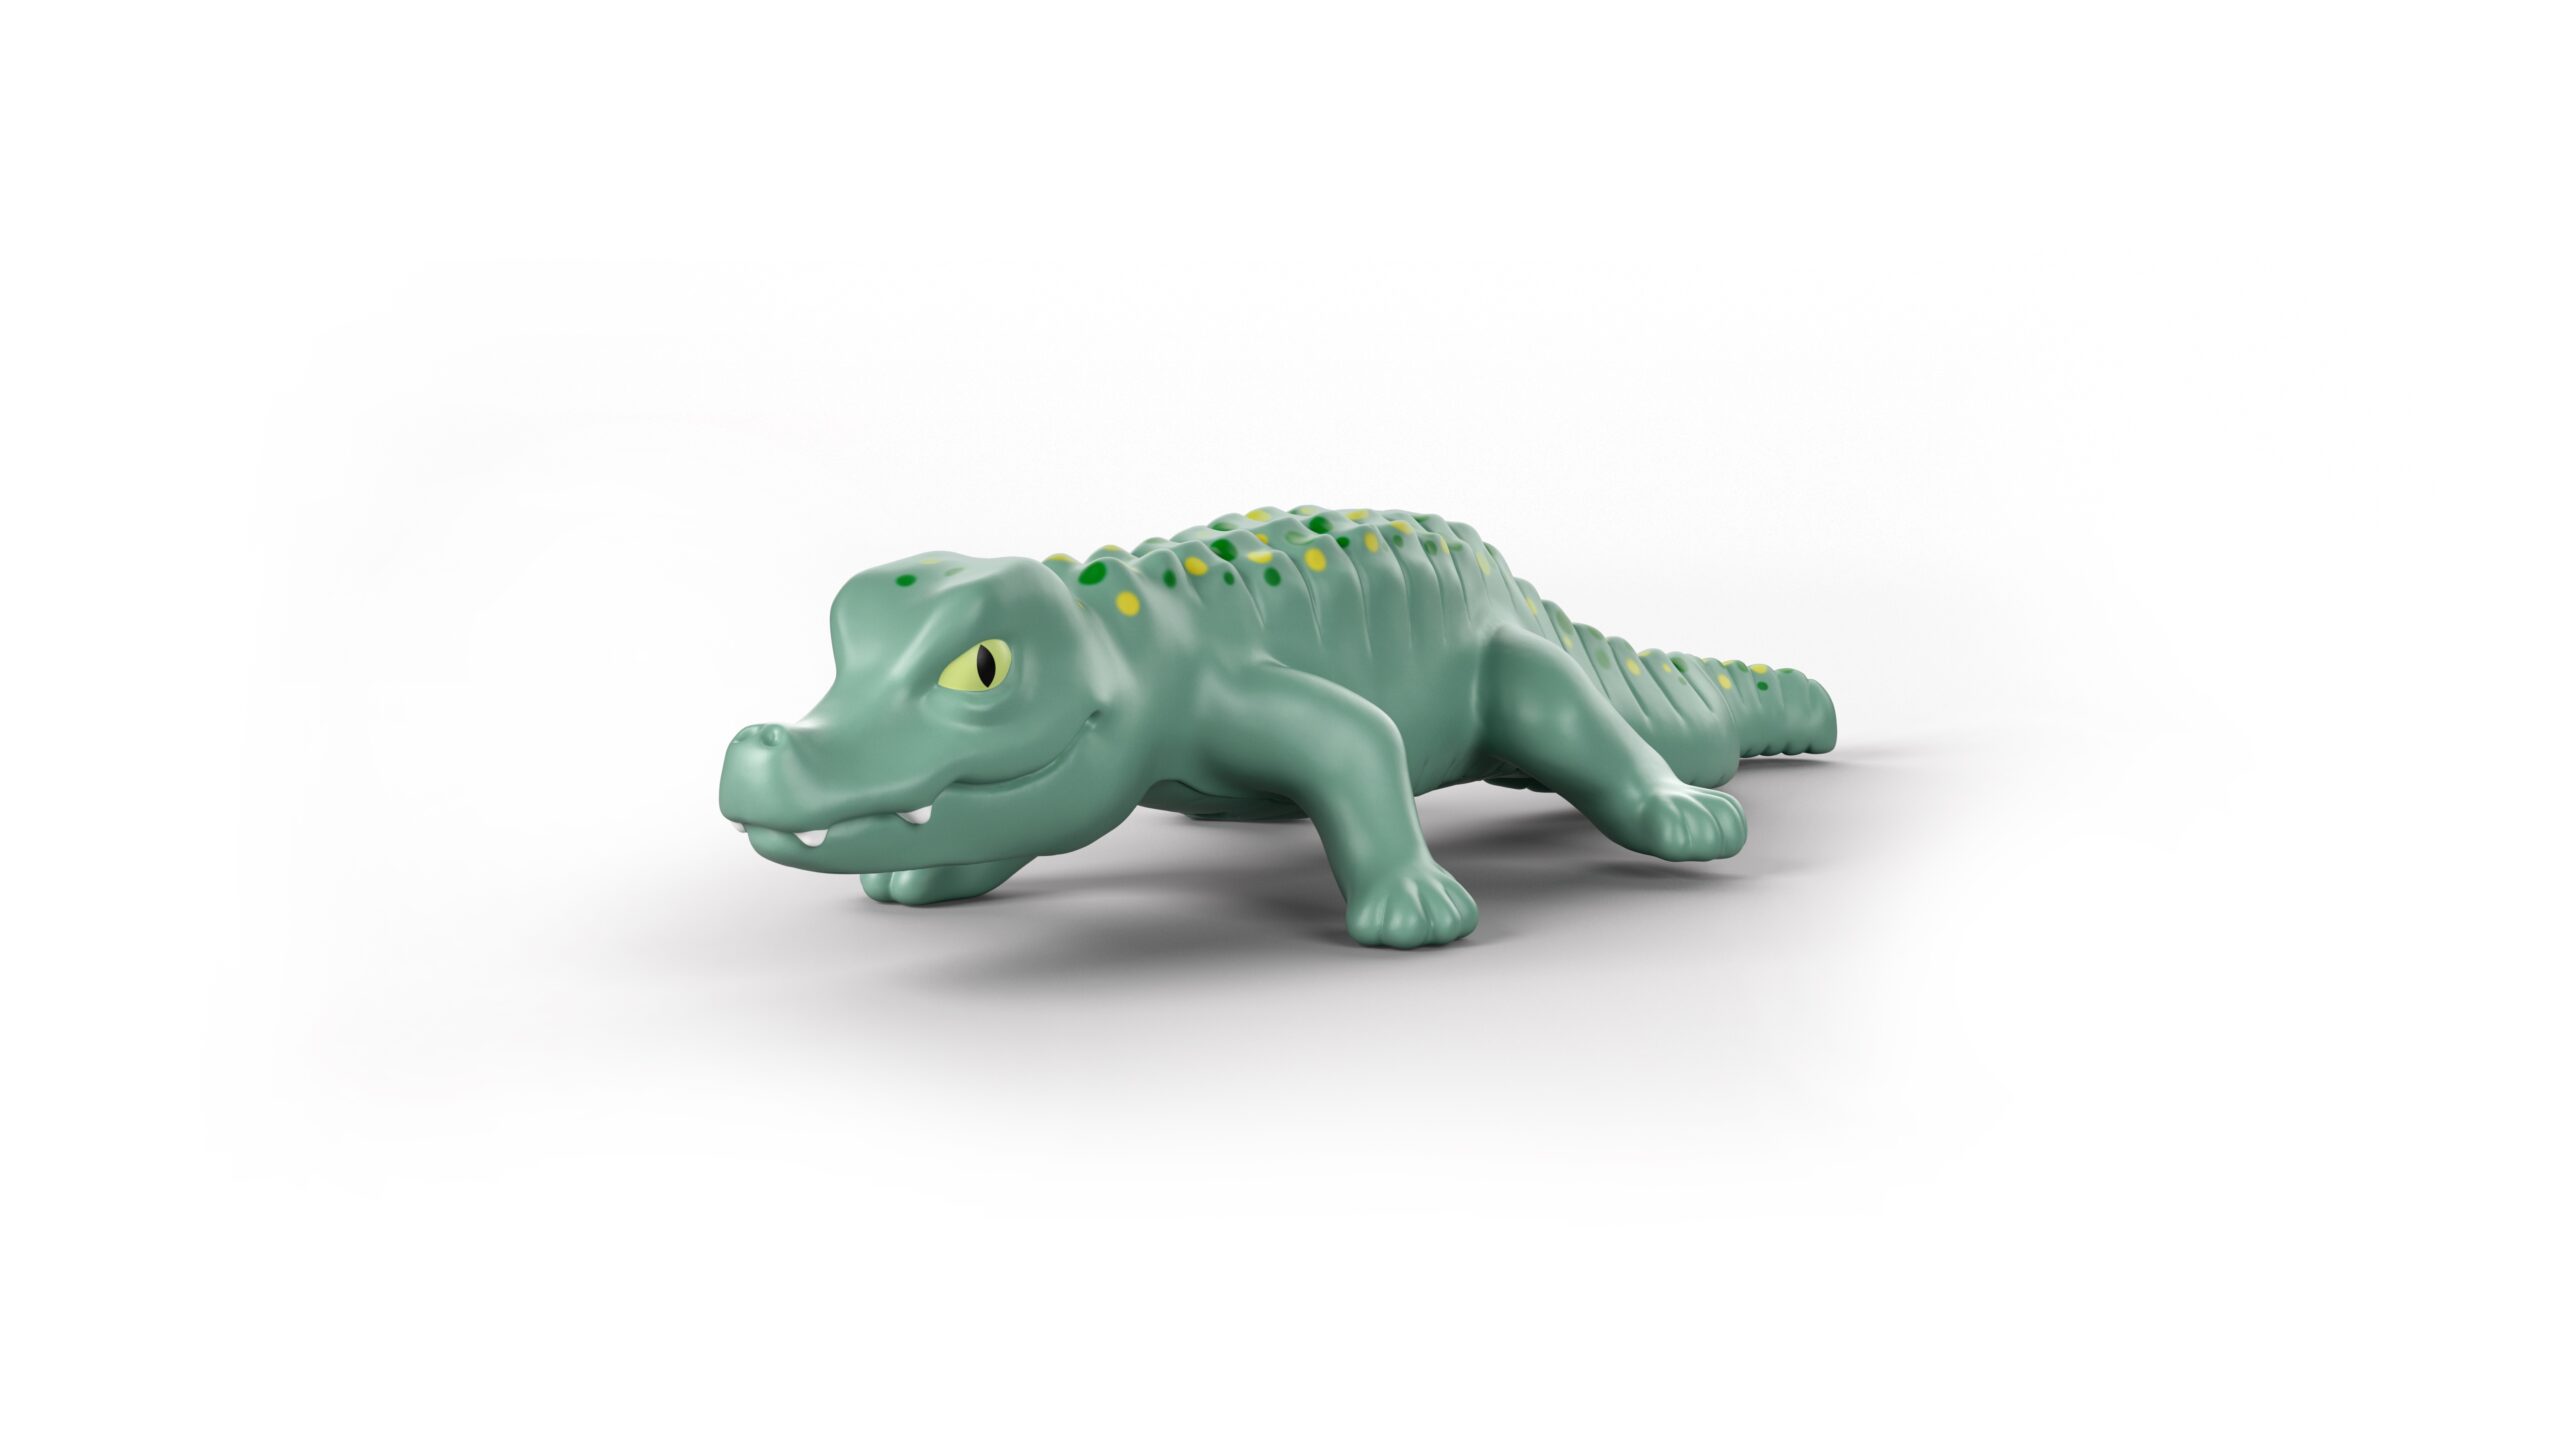 Alligator Happy Meal toy